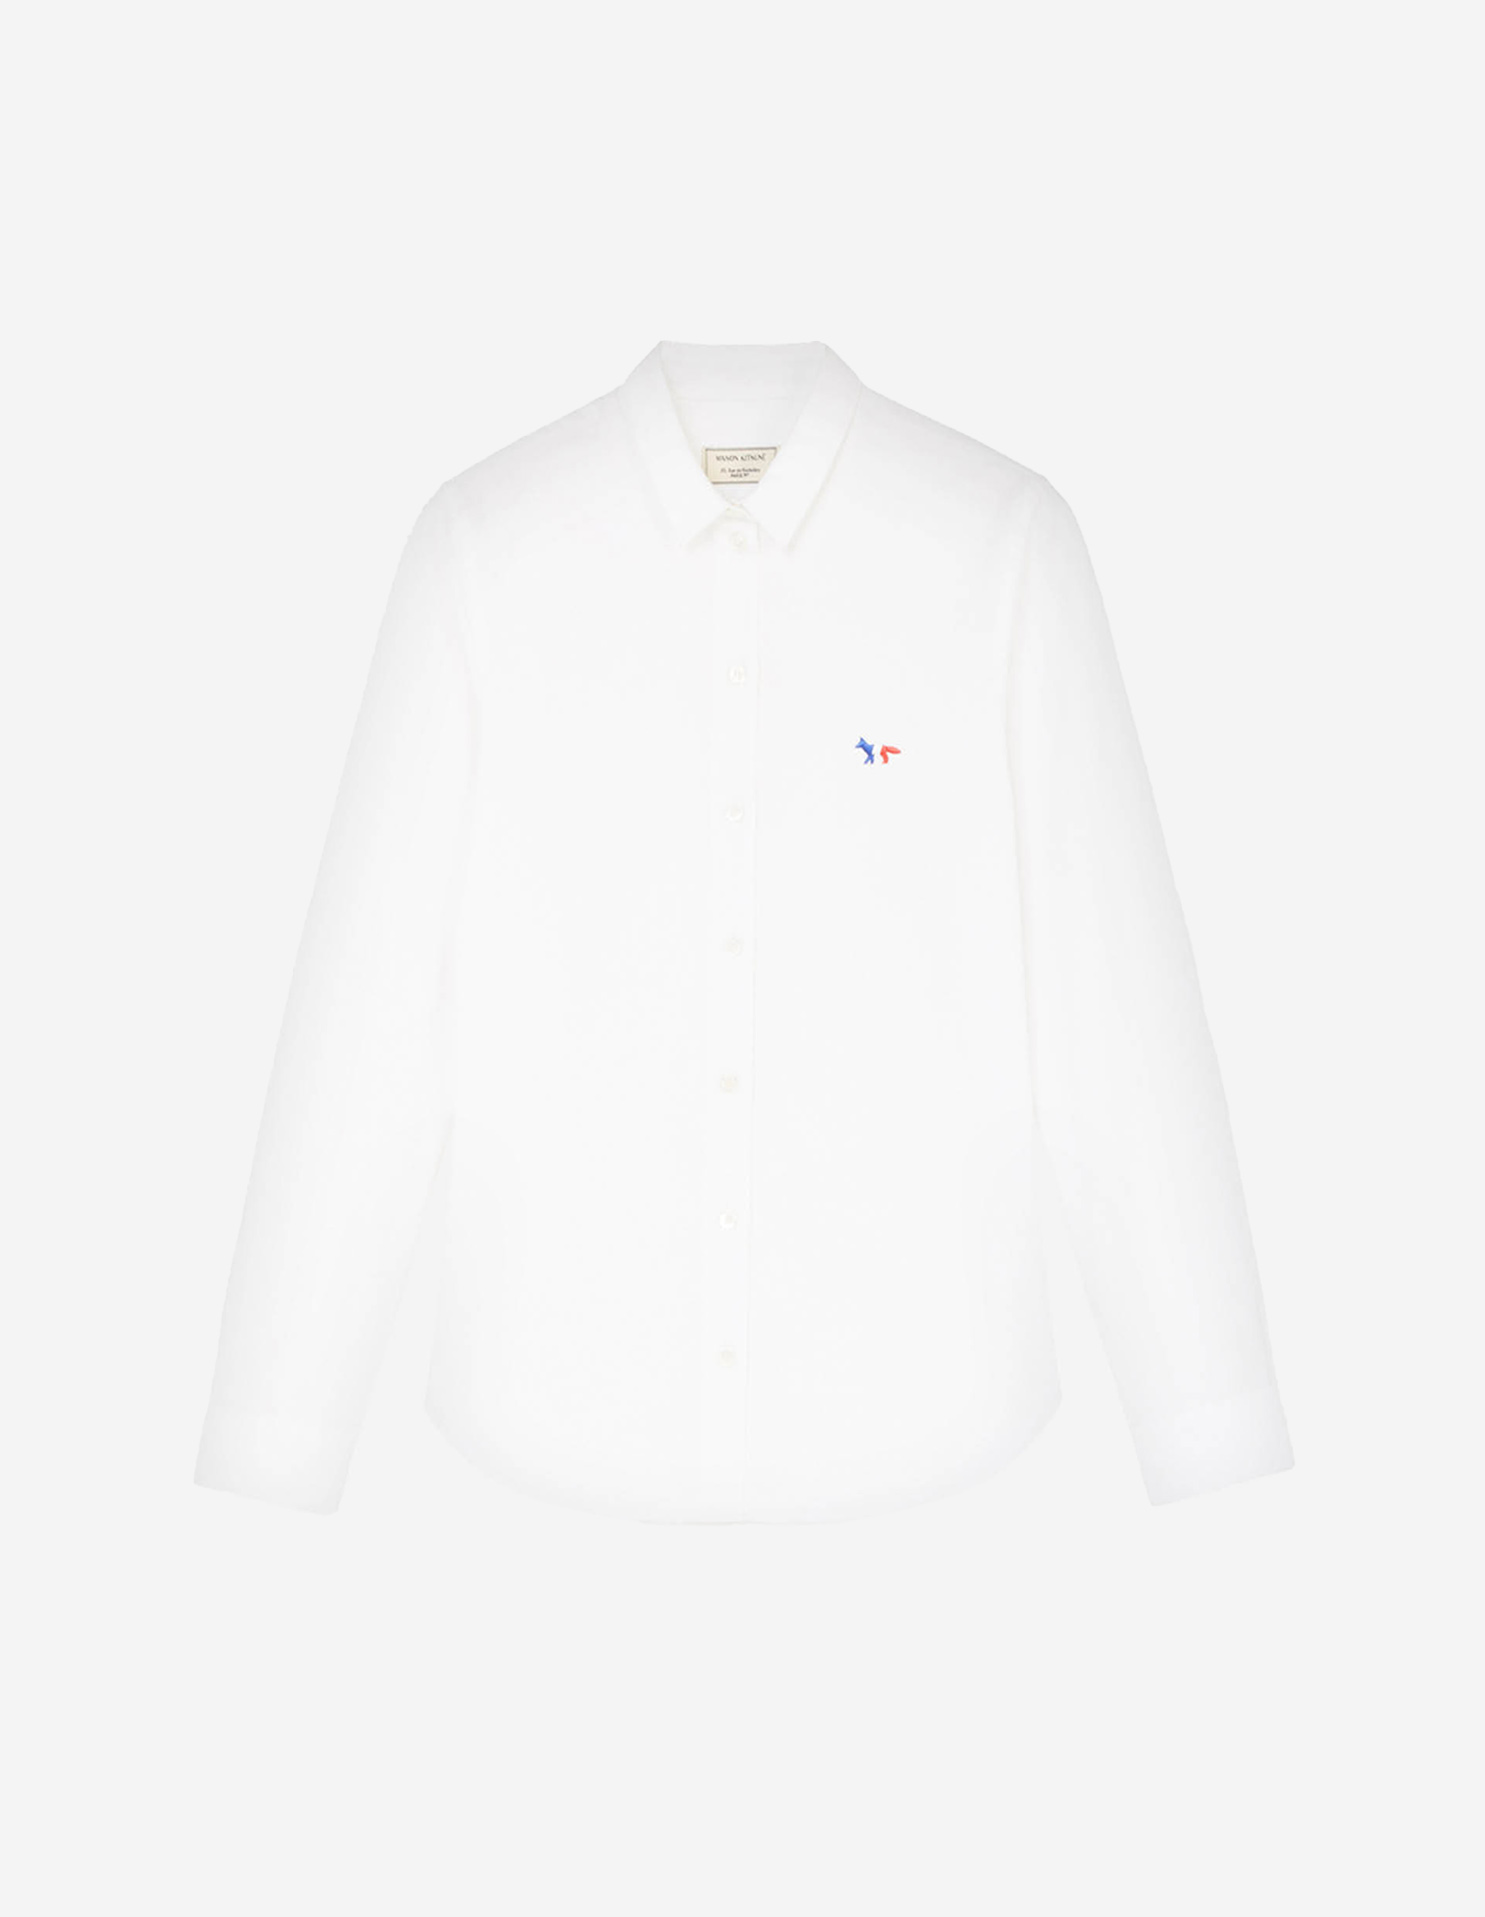 OXFORD TRICOLOR FOX PATCH CLASSIC SHIRT